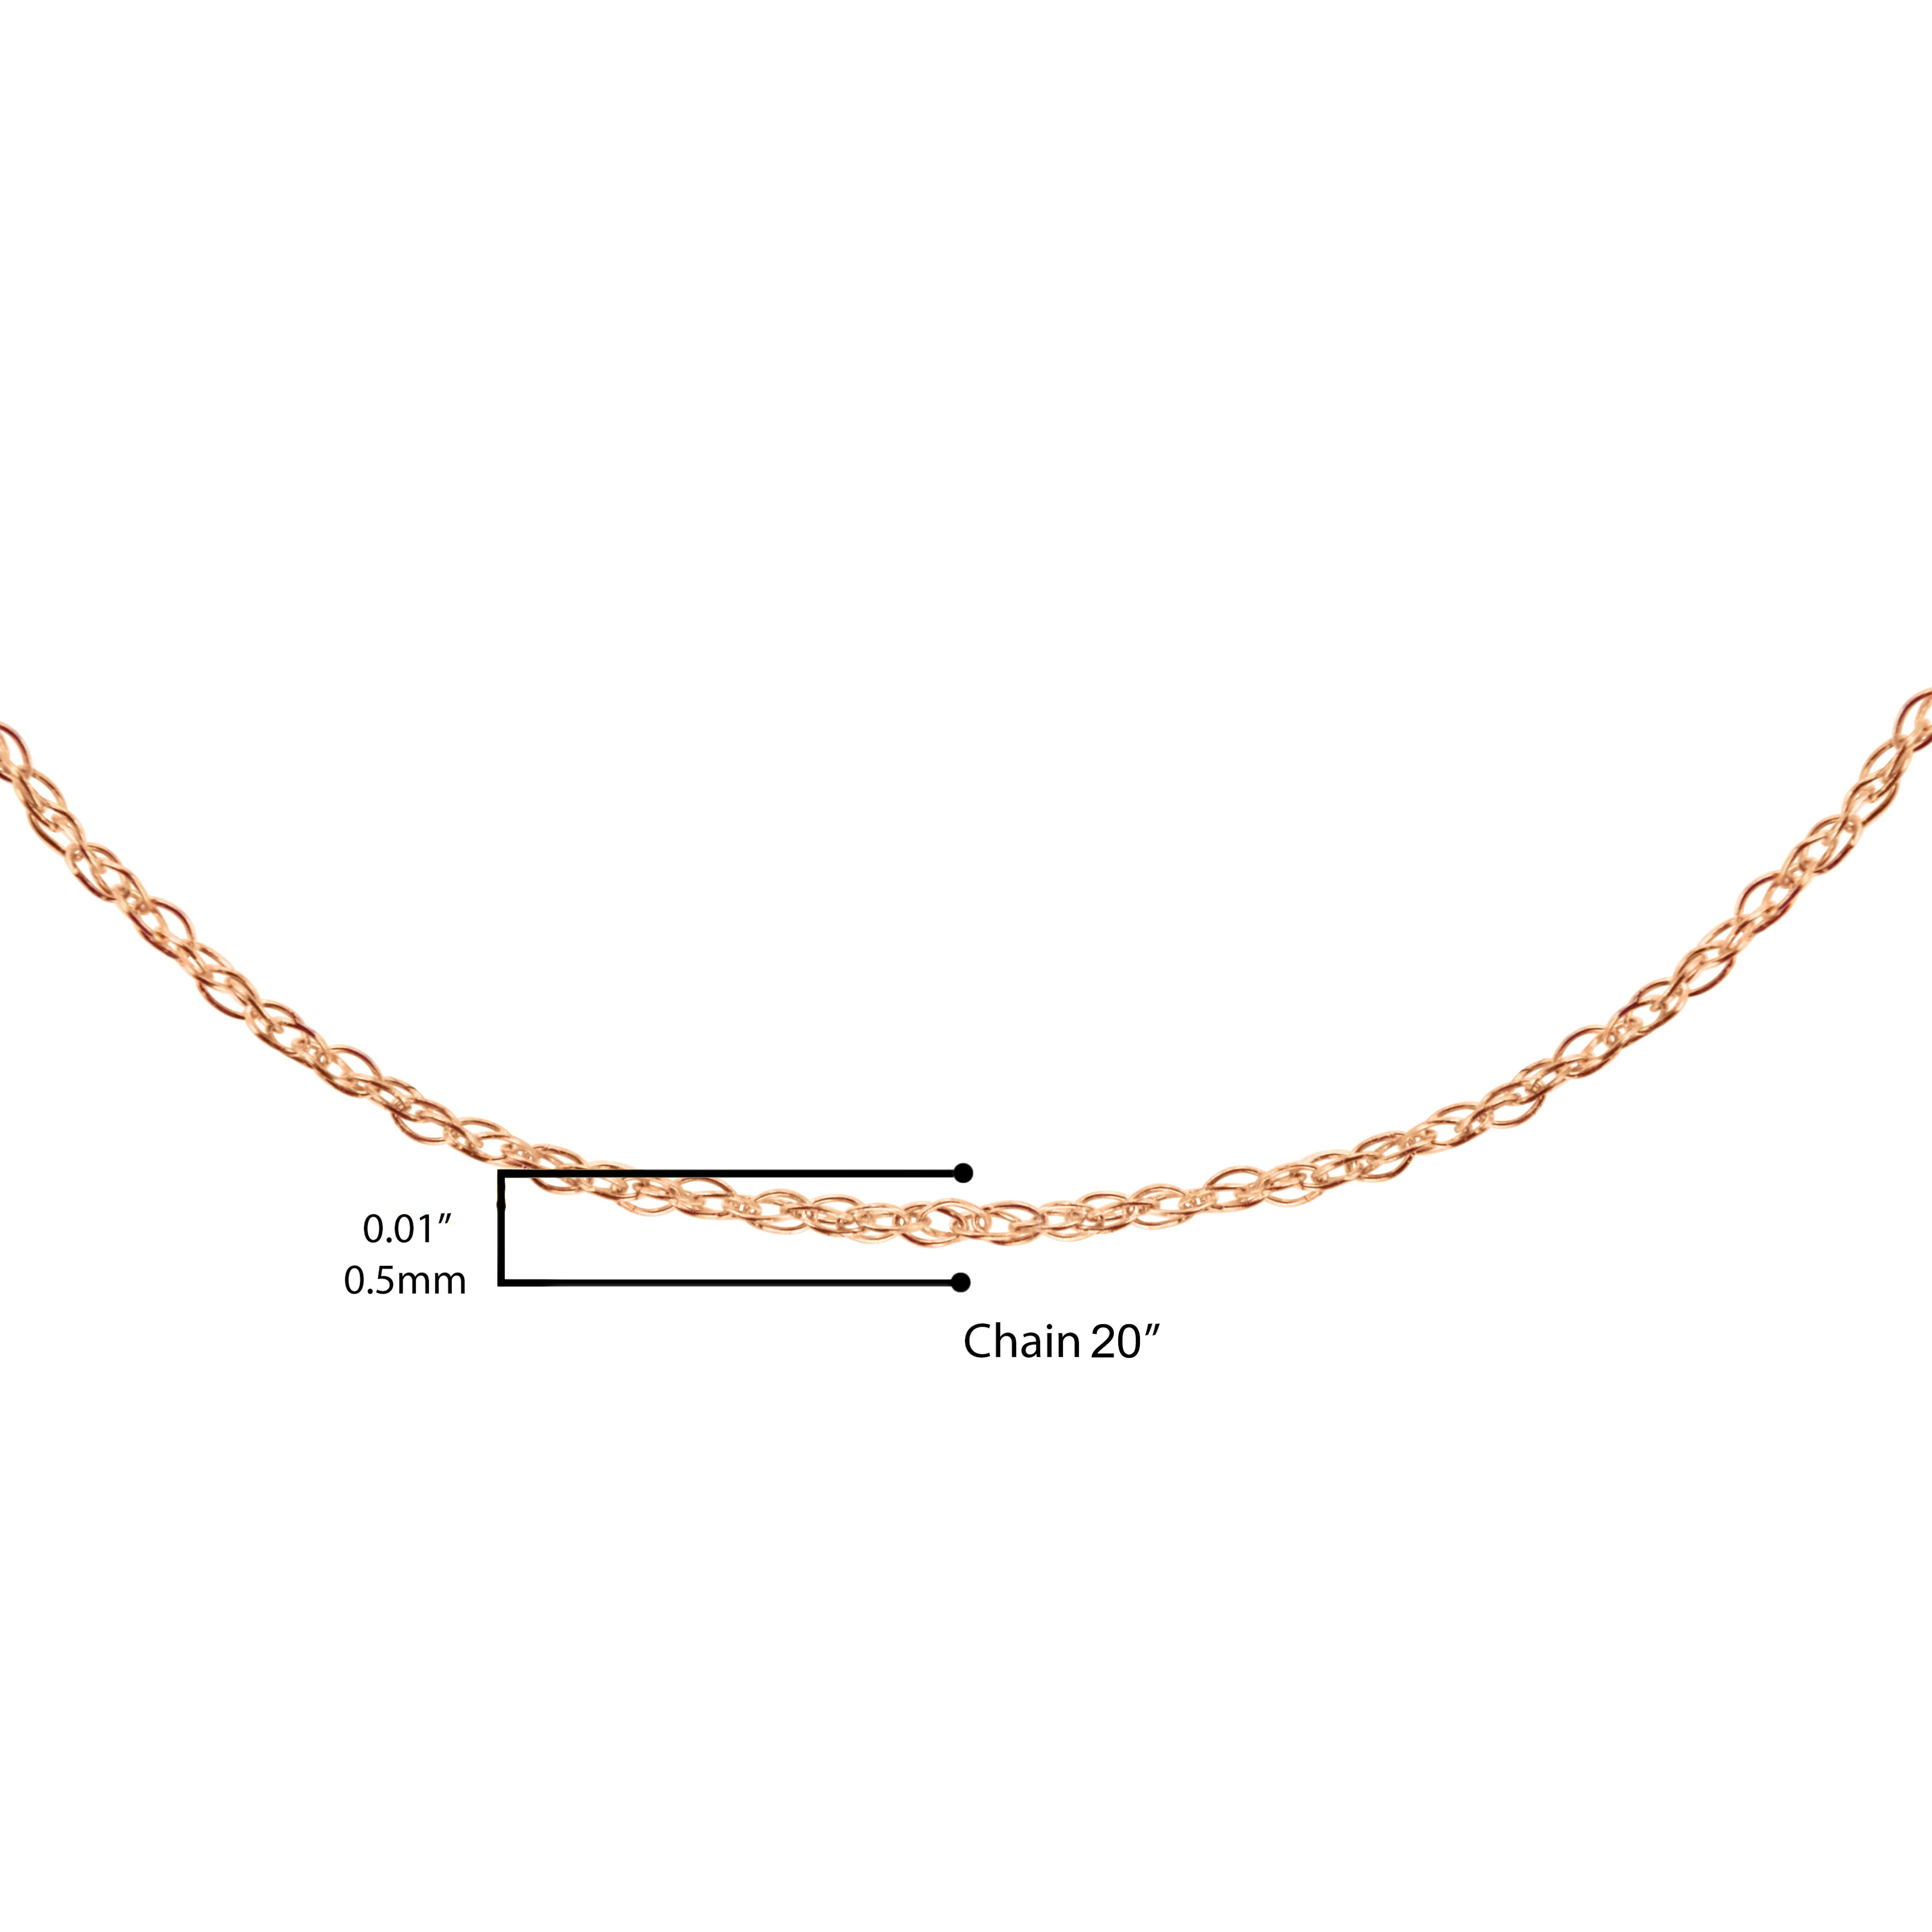 standard necklace chain length